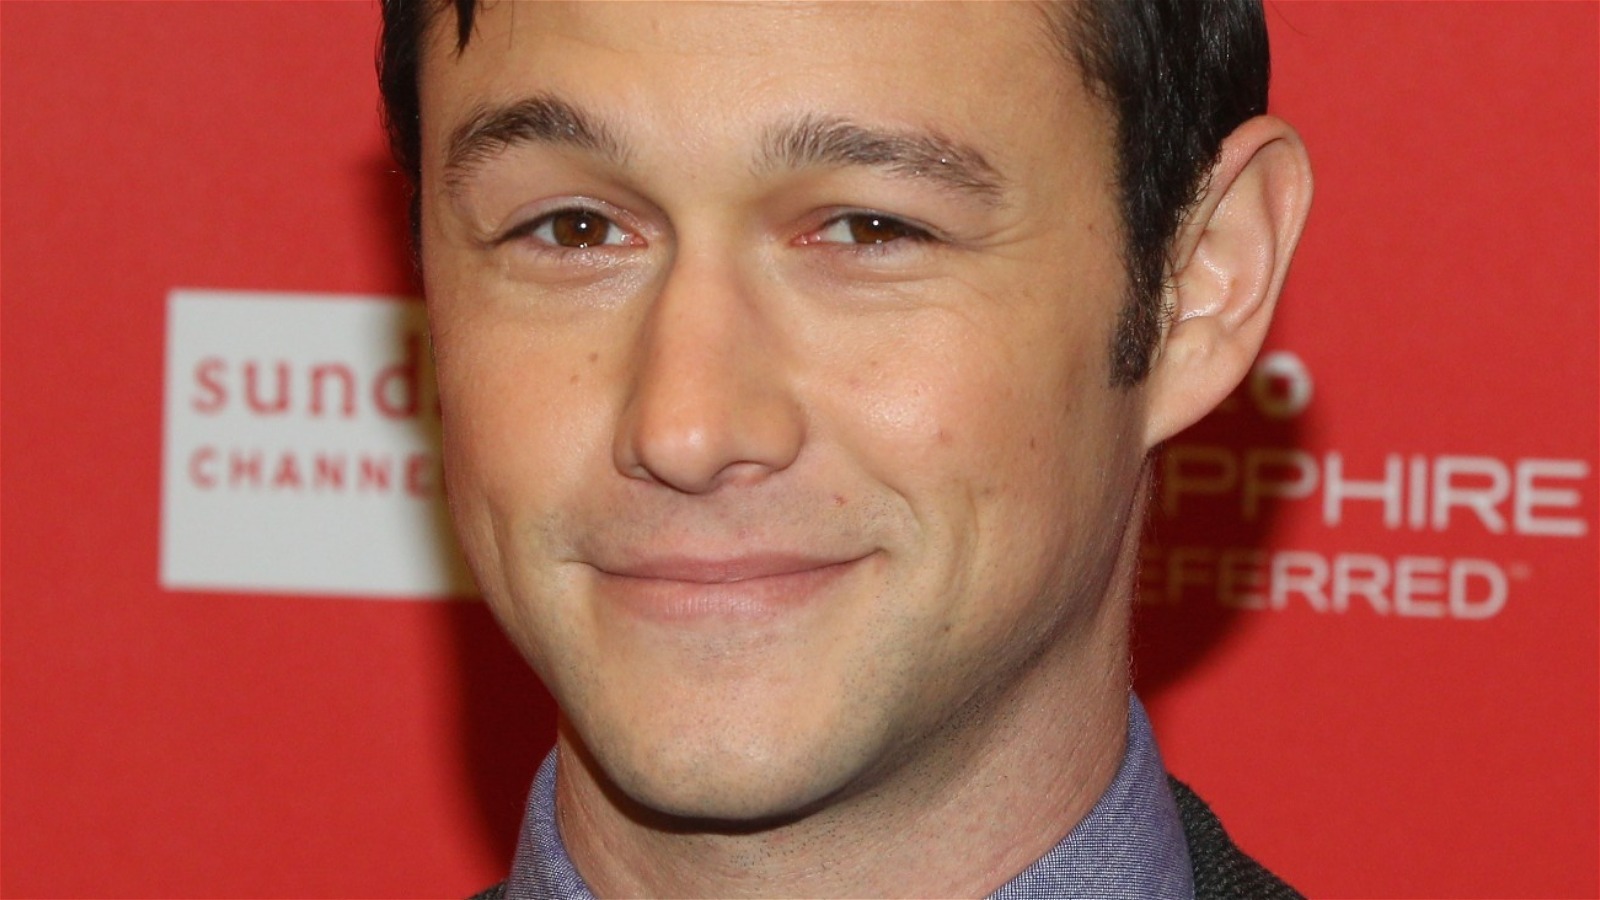 The Transformation Of Joseph Gordon-Levitt From Childhood To 41 Years Old